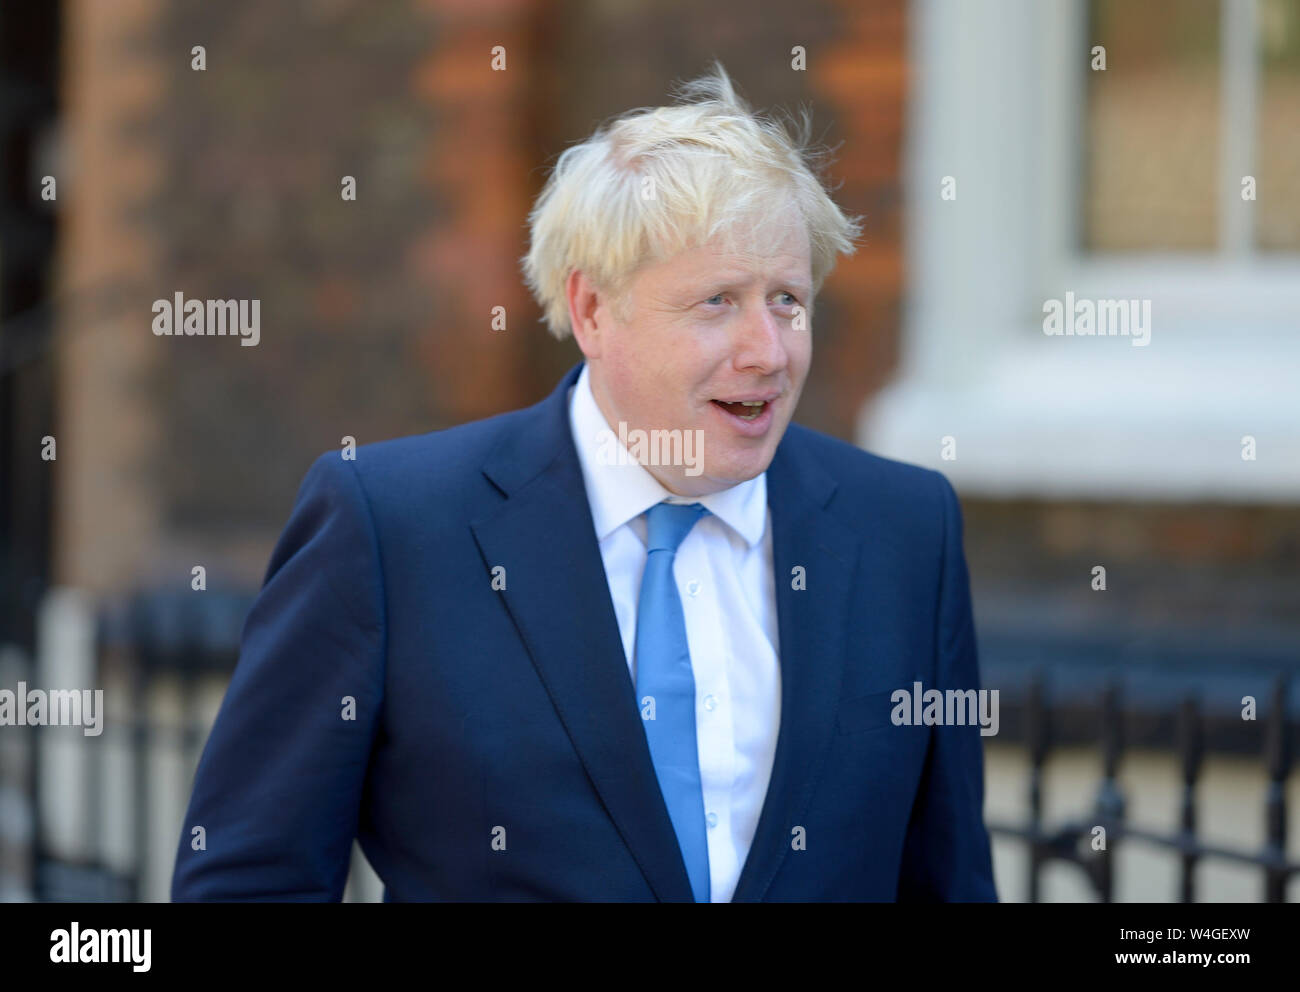 London, UK. July 23rd. Boris Johnson leaves his base in Great College Street, Westminster, after his election as leader of the Conservative Party and, therefore, Prime Minister Credit: PjrFoto/Alamy Live News Stock Photo